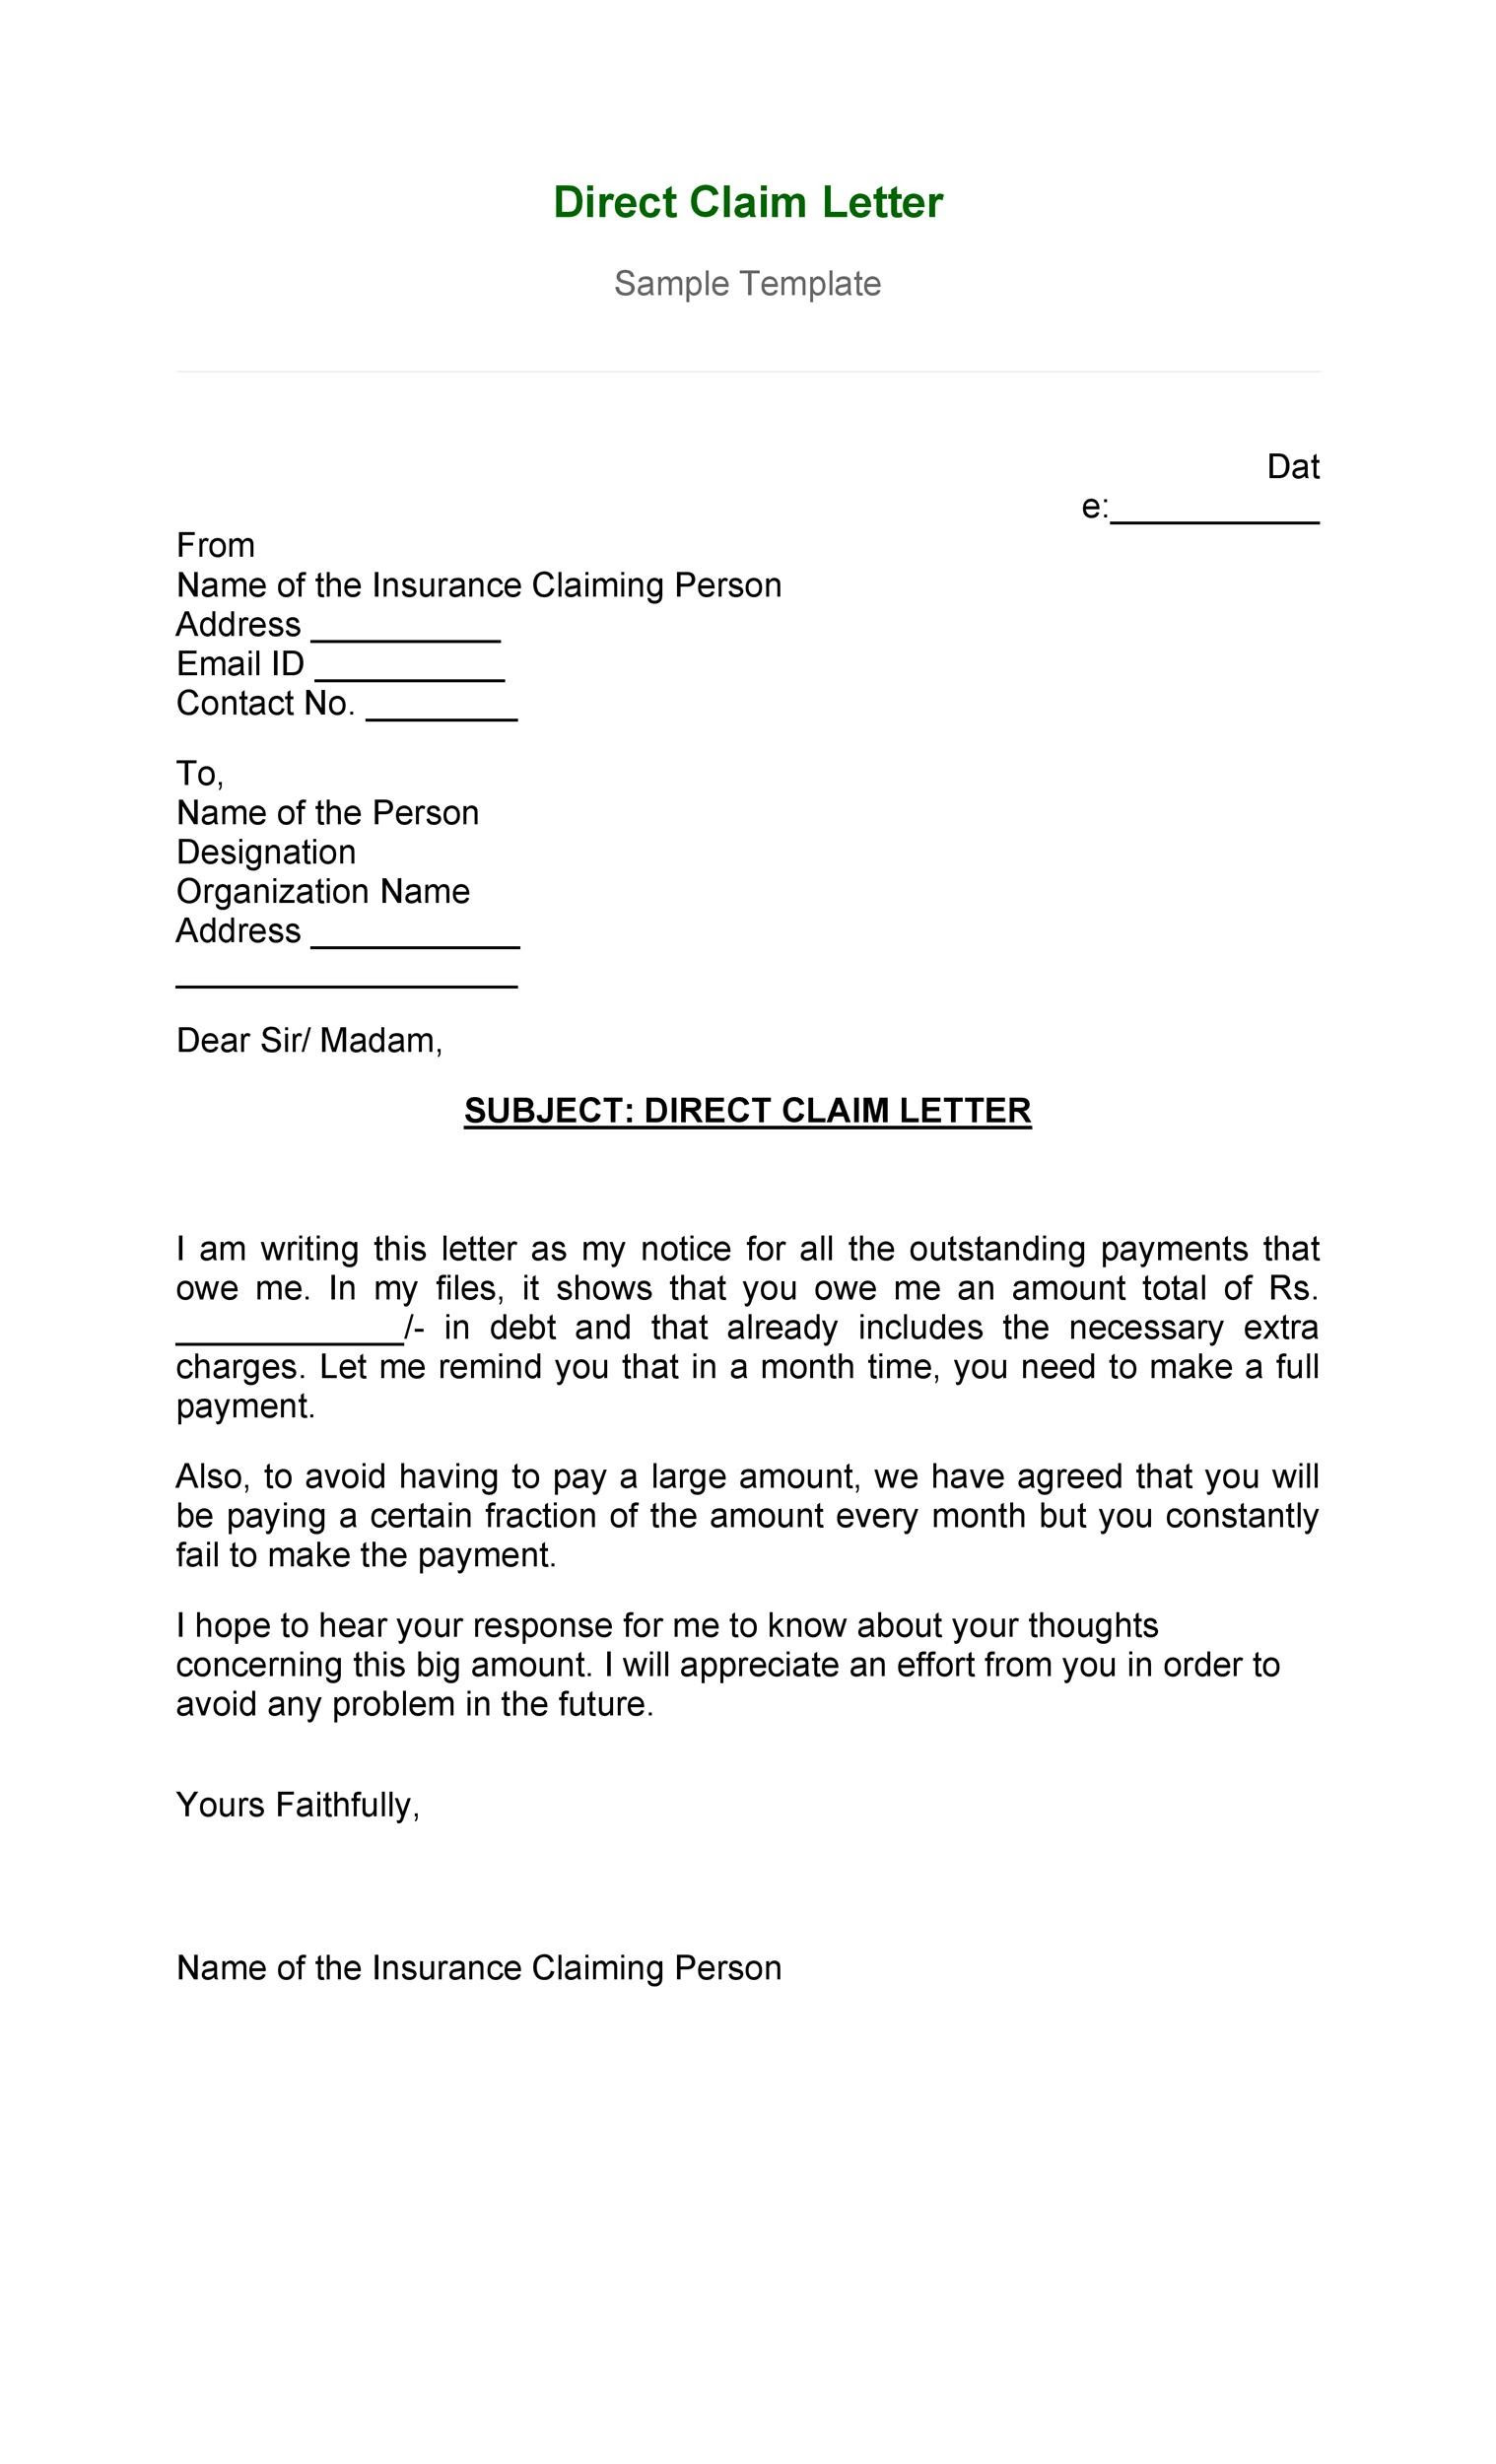 Sales Letter Template: Insurance Claim Letter Template